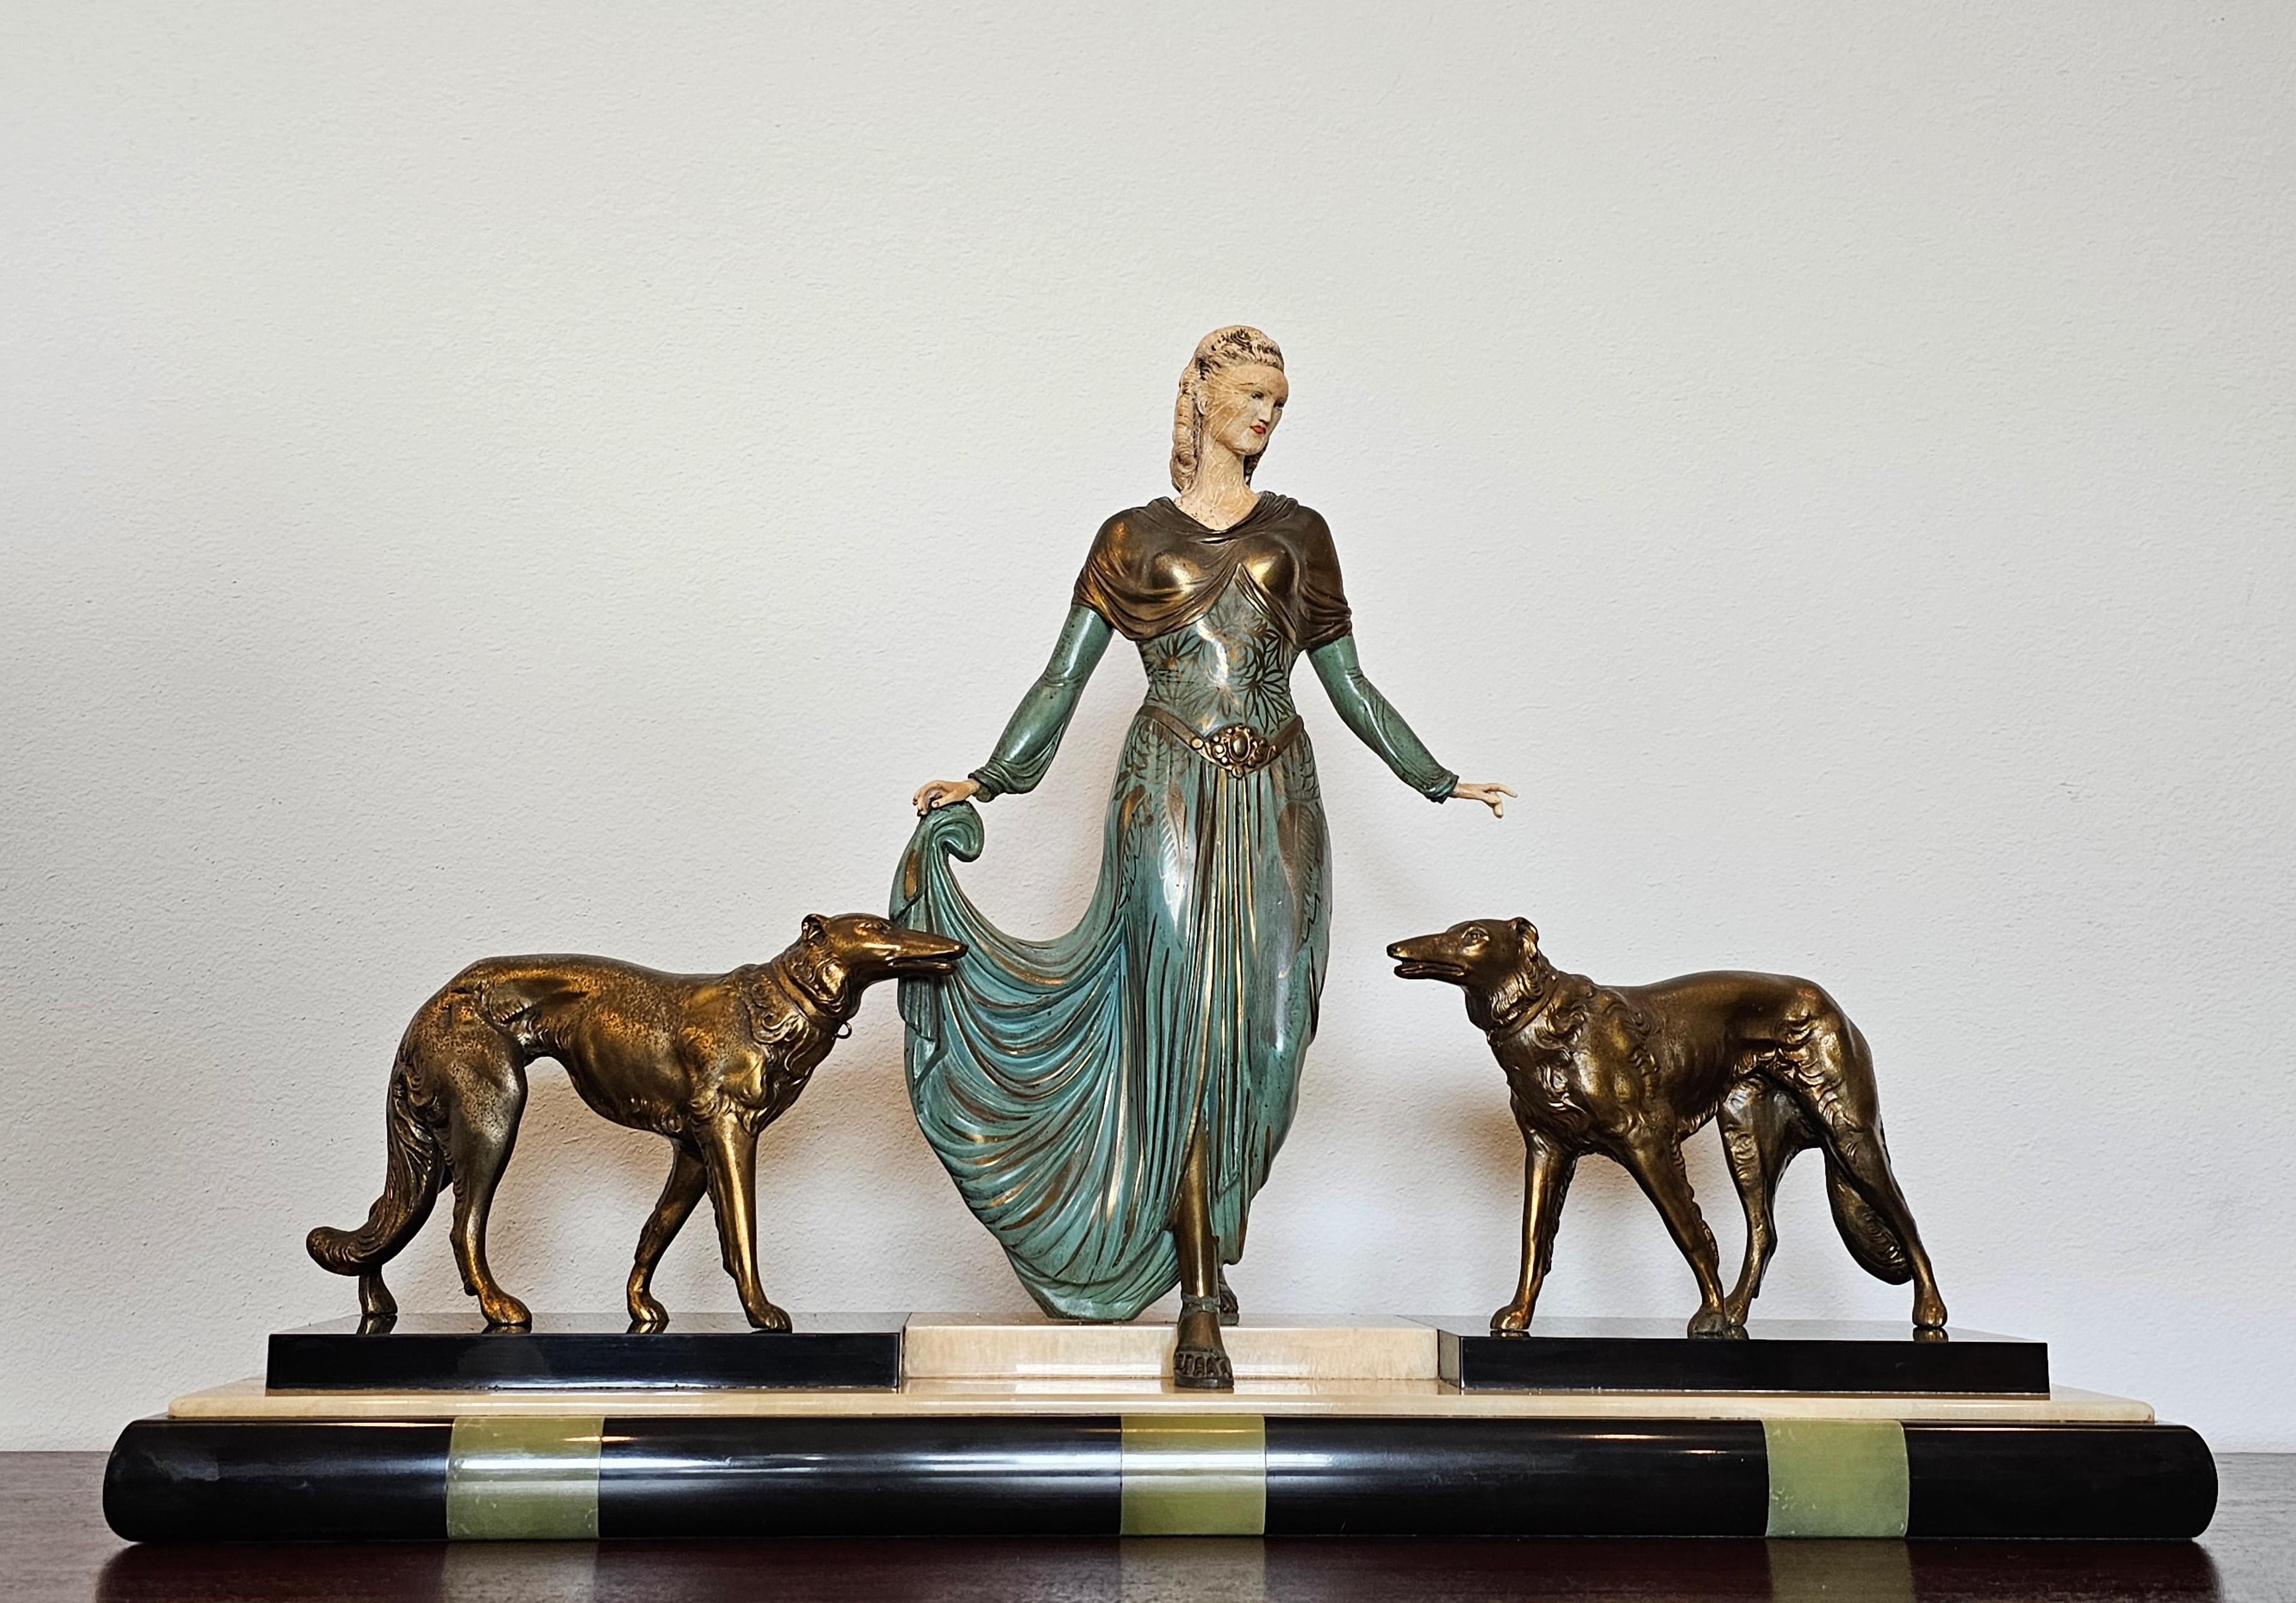 A stunning large French Art Deco sculpture by Georges (J. Roggia) Gori (French, 1894-1944), titled Élégante et Son Chiens, circa 1925-1930

Most impressive work, mixed material including bronze, onyx, and ivorine, exceptionally executed design and